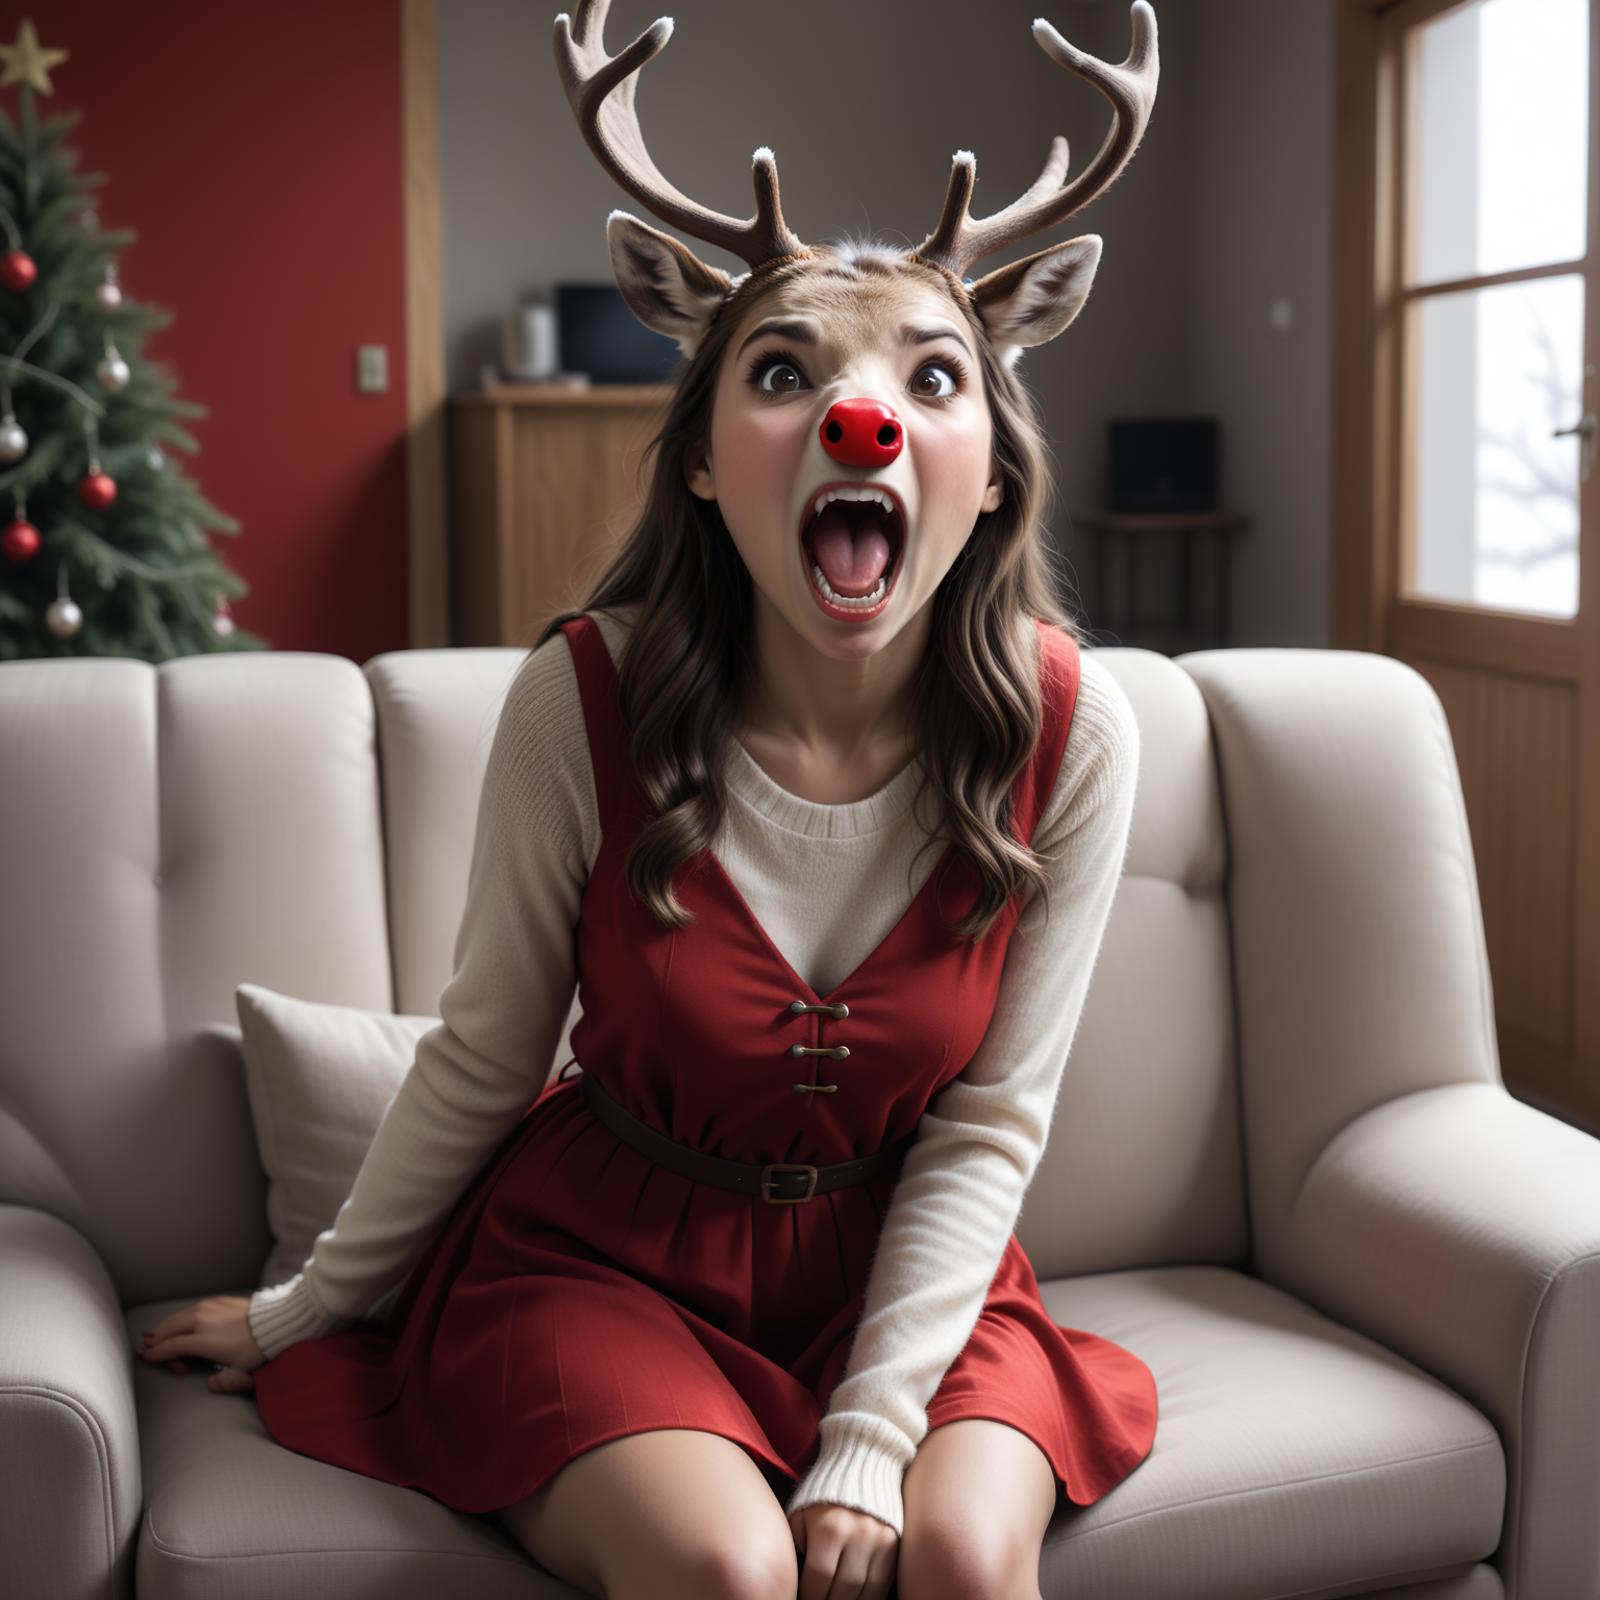 A woman wearing a reindeer antler headband sitting on the couch.